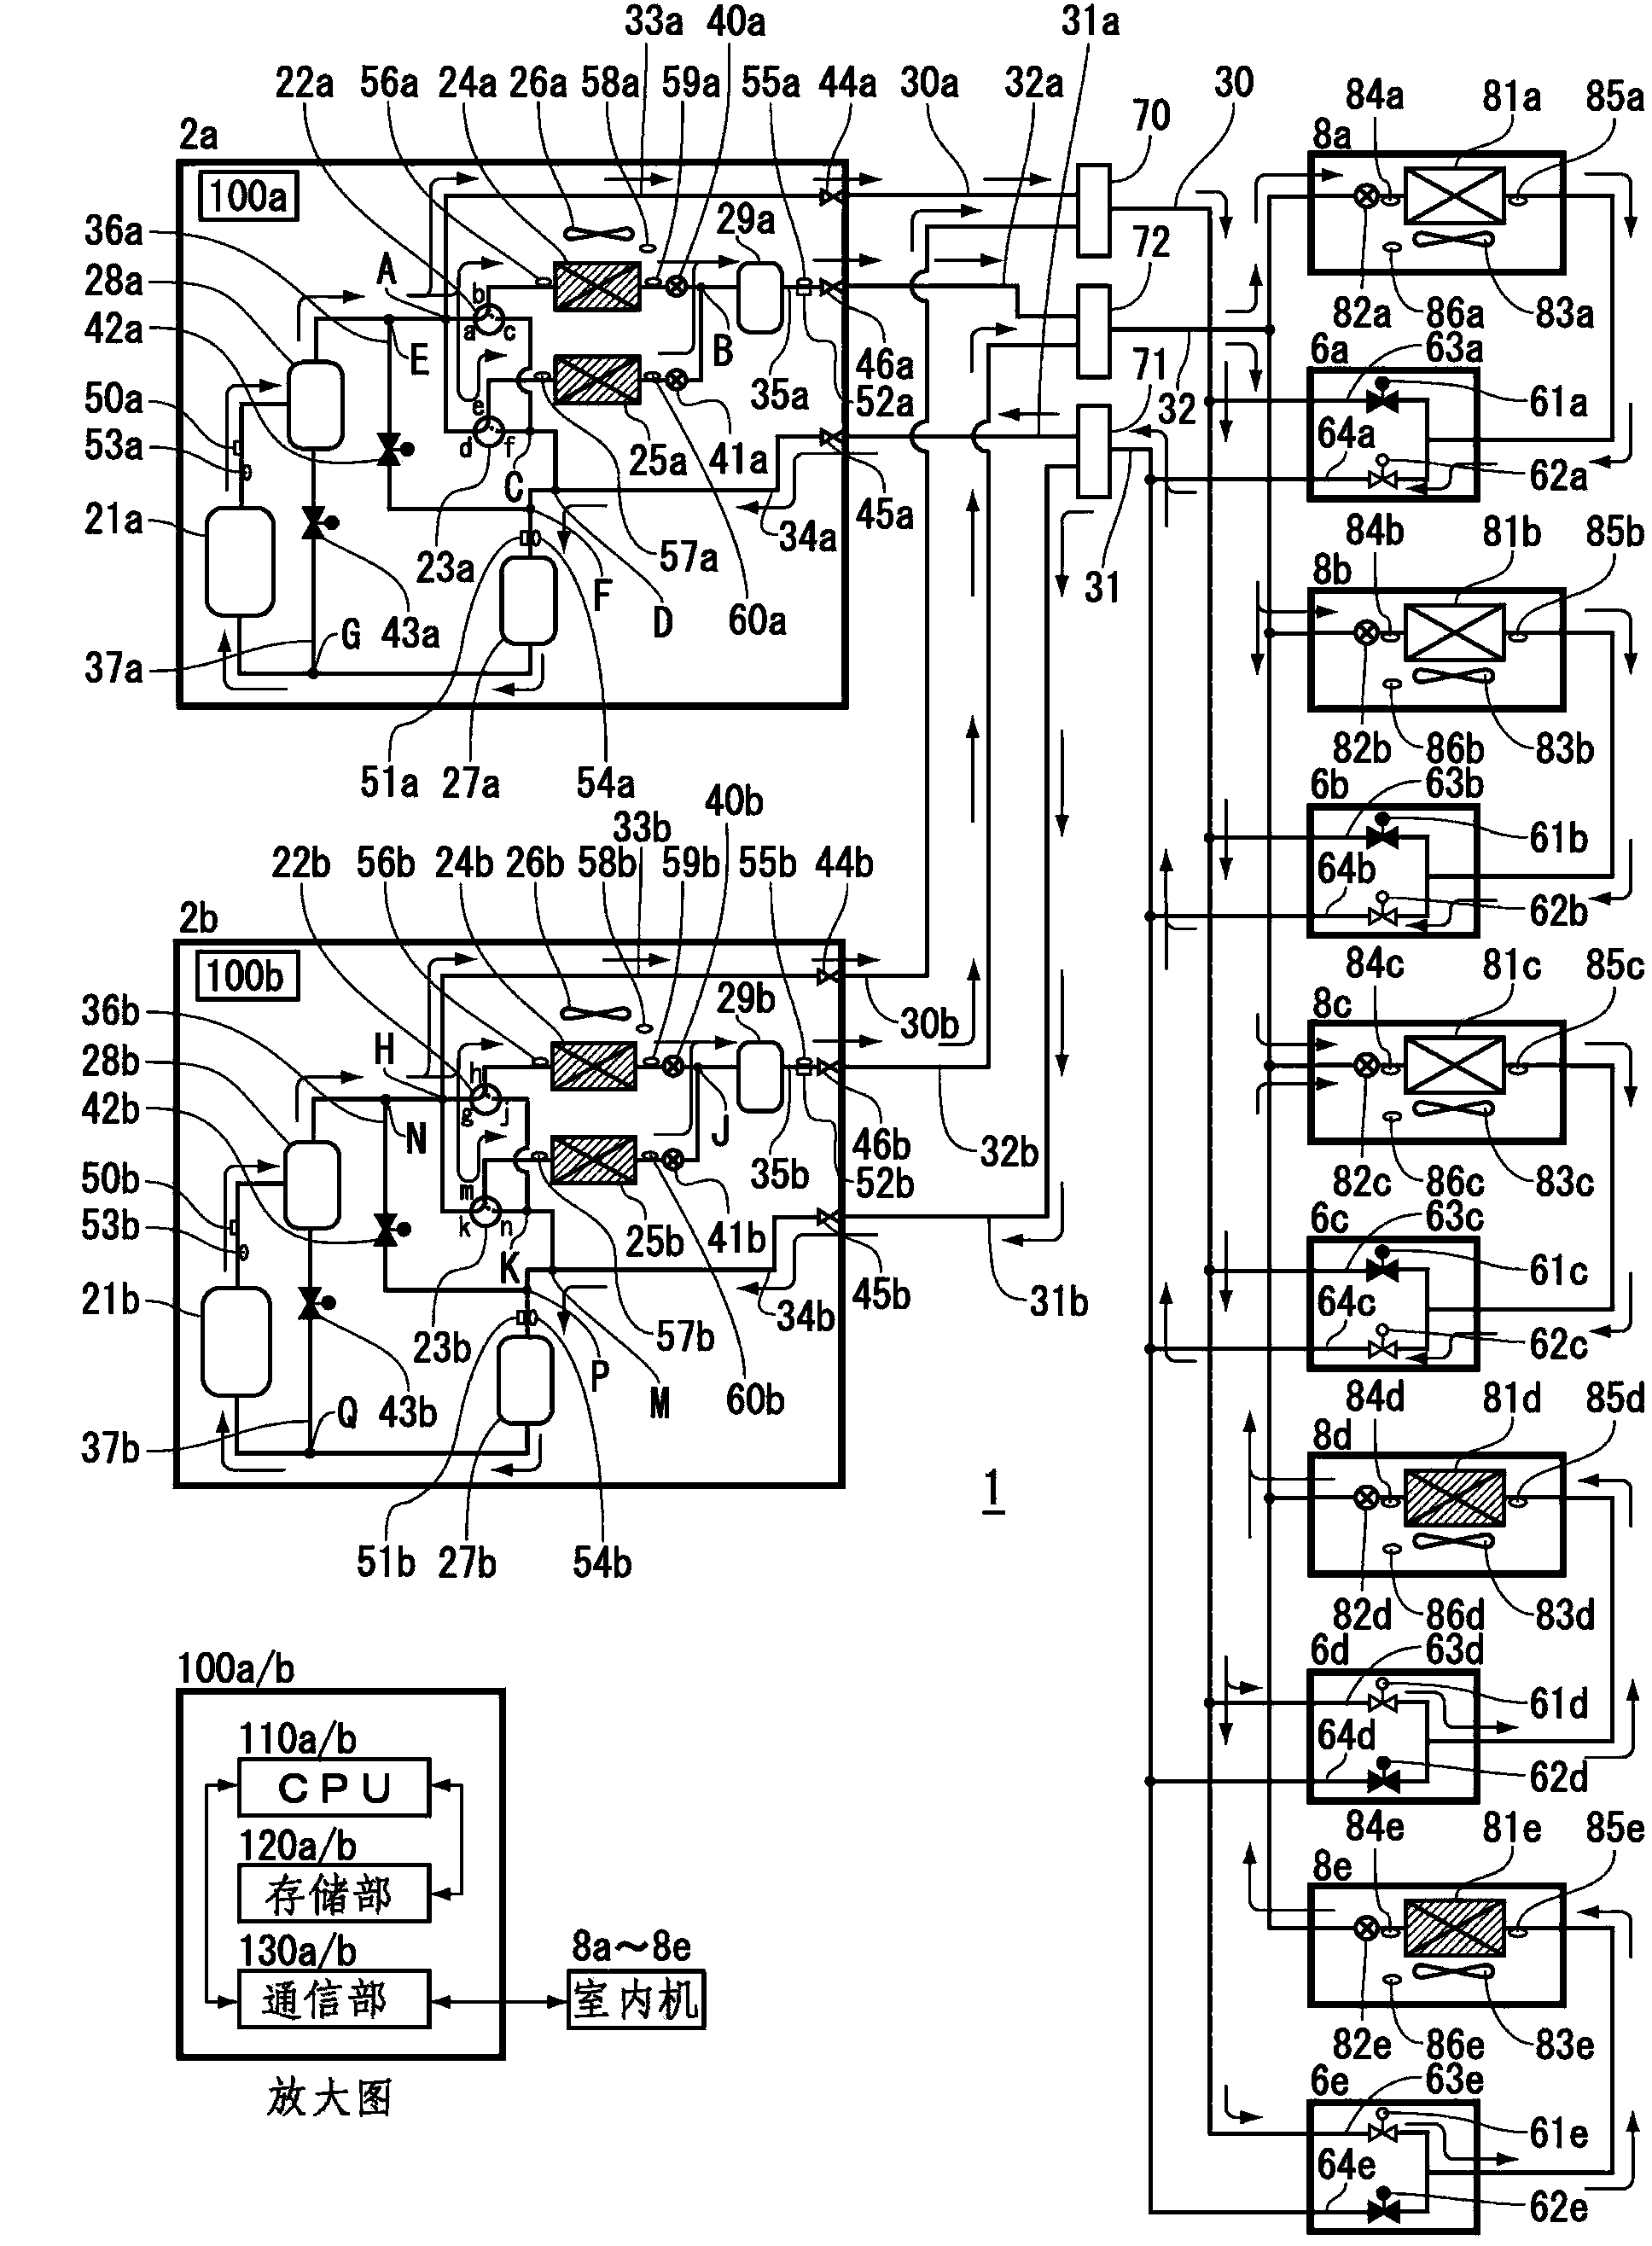 Outdoor unit for air-conditioning apparatus, and air-conditioning apparatus